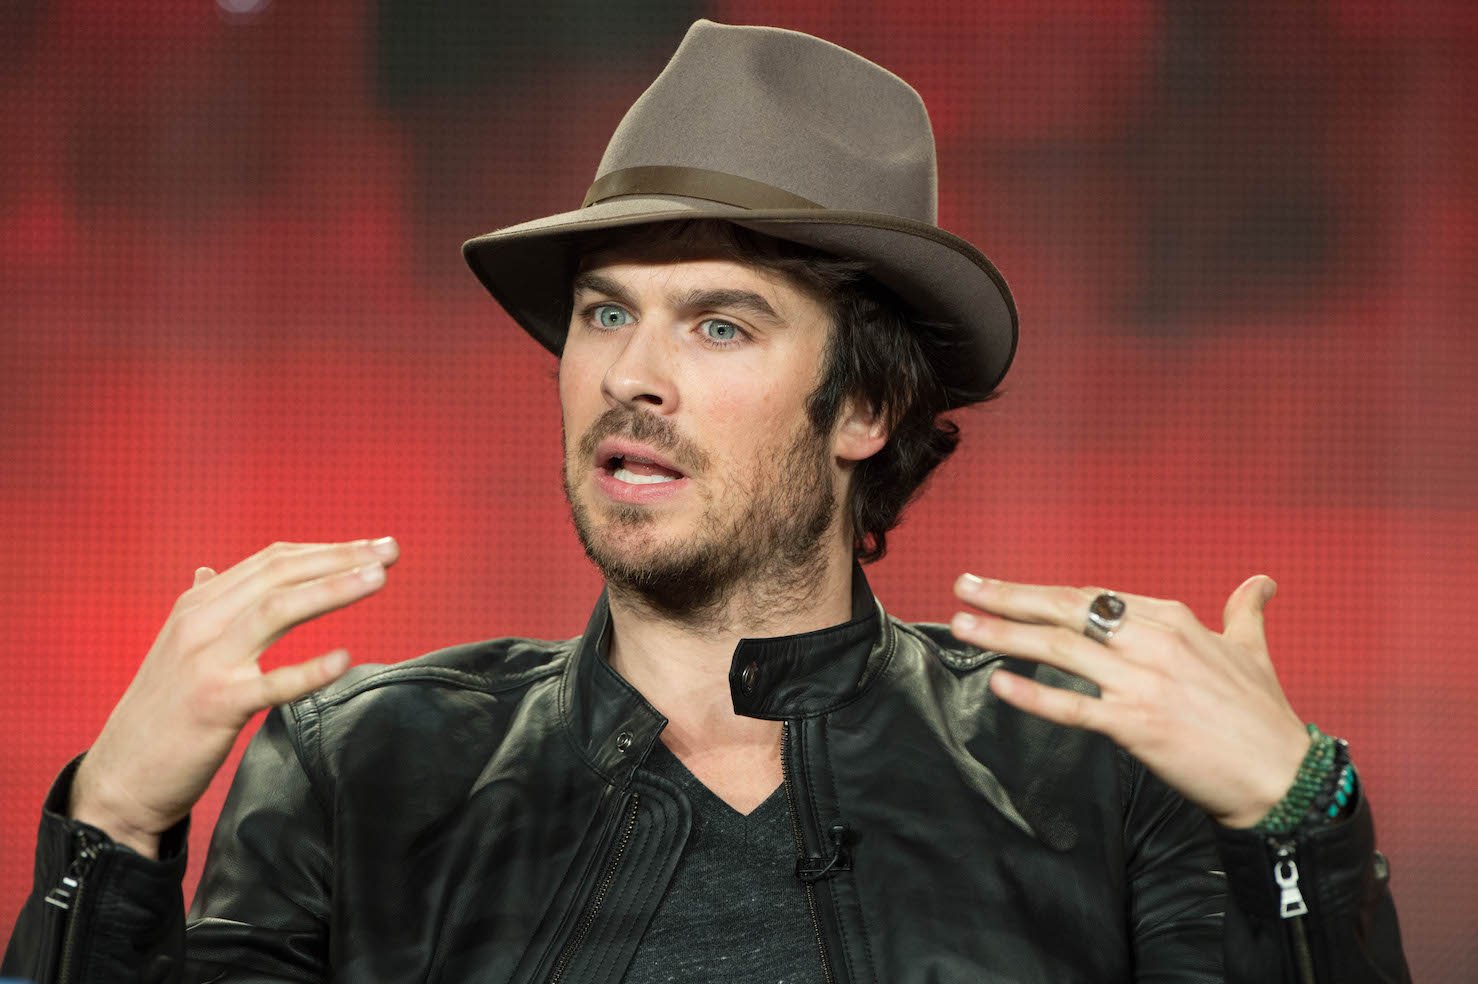 Ian Somerhalder of 'The Vampire Diaries' talking against a red background